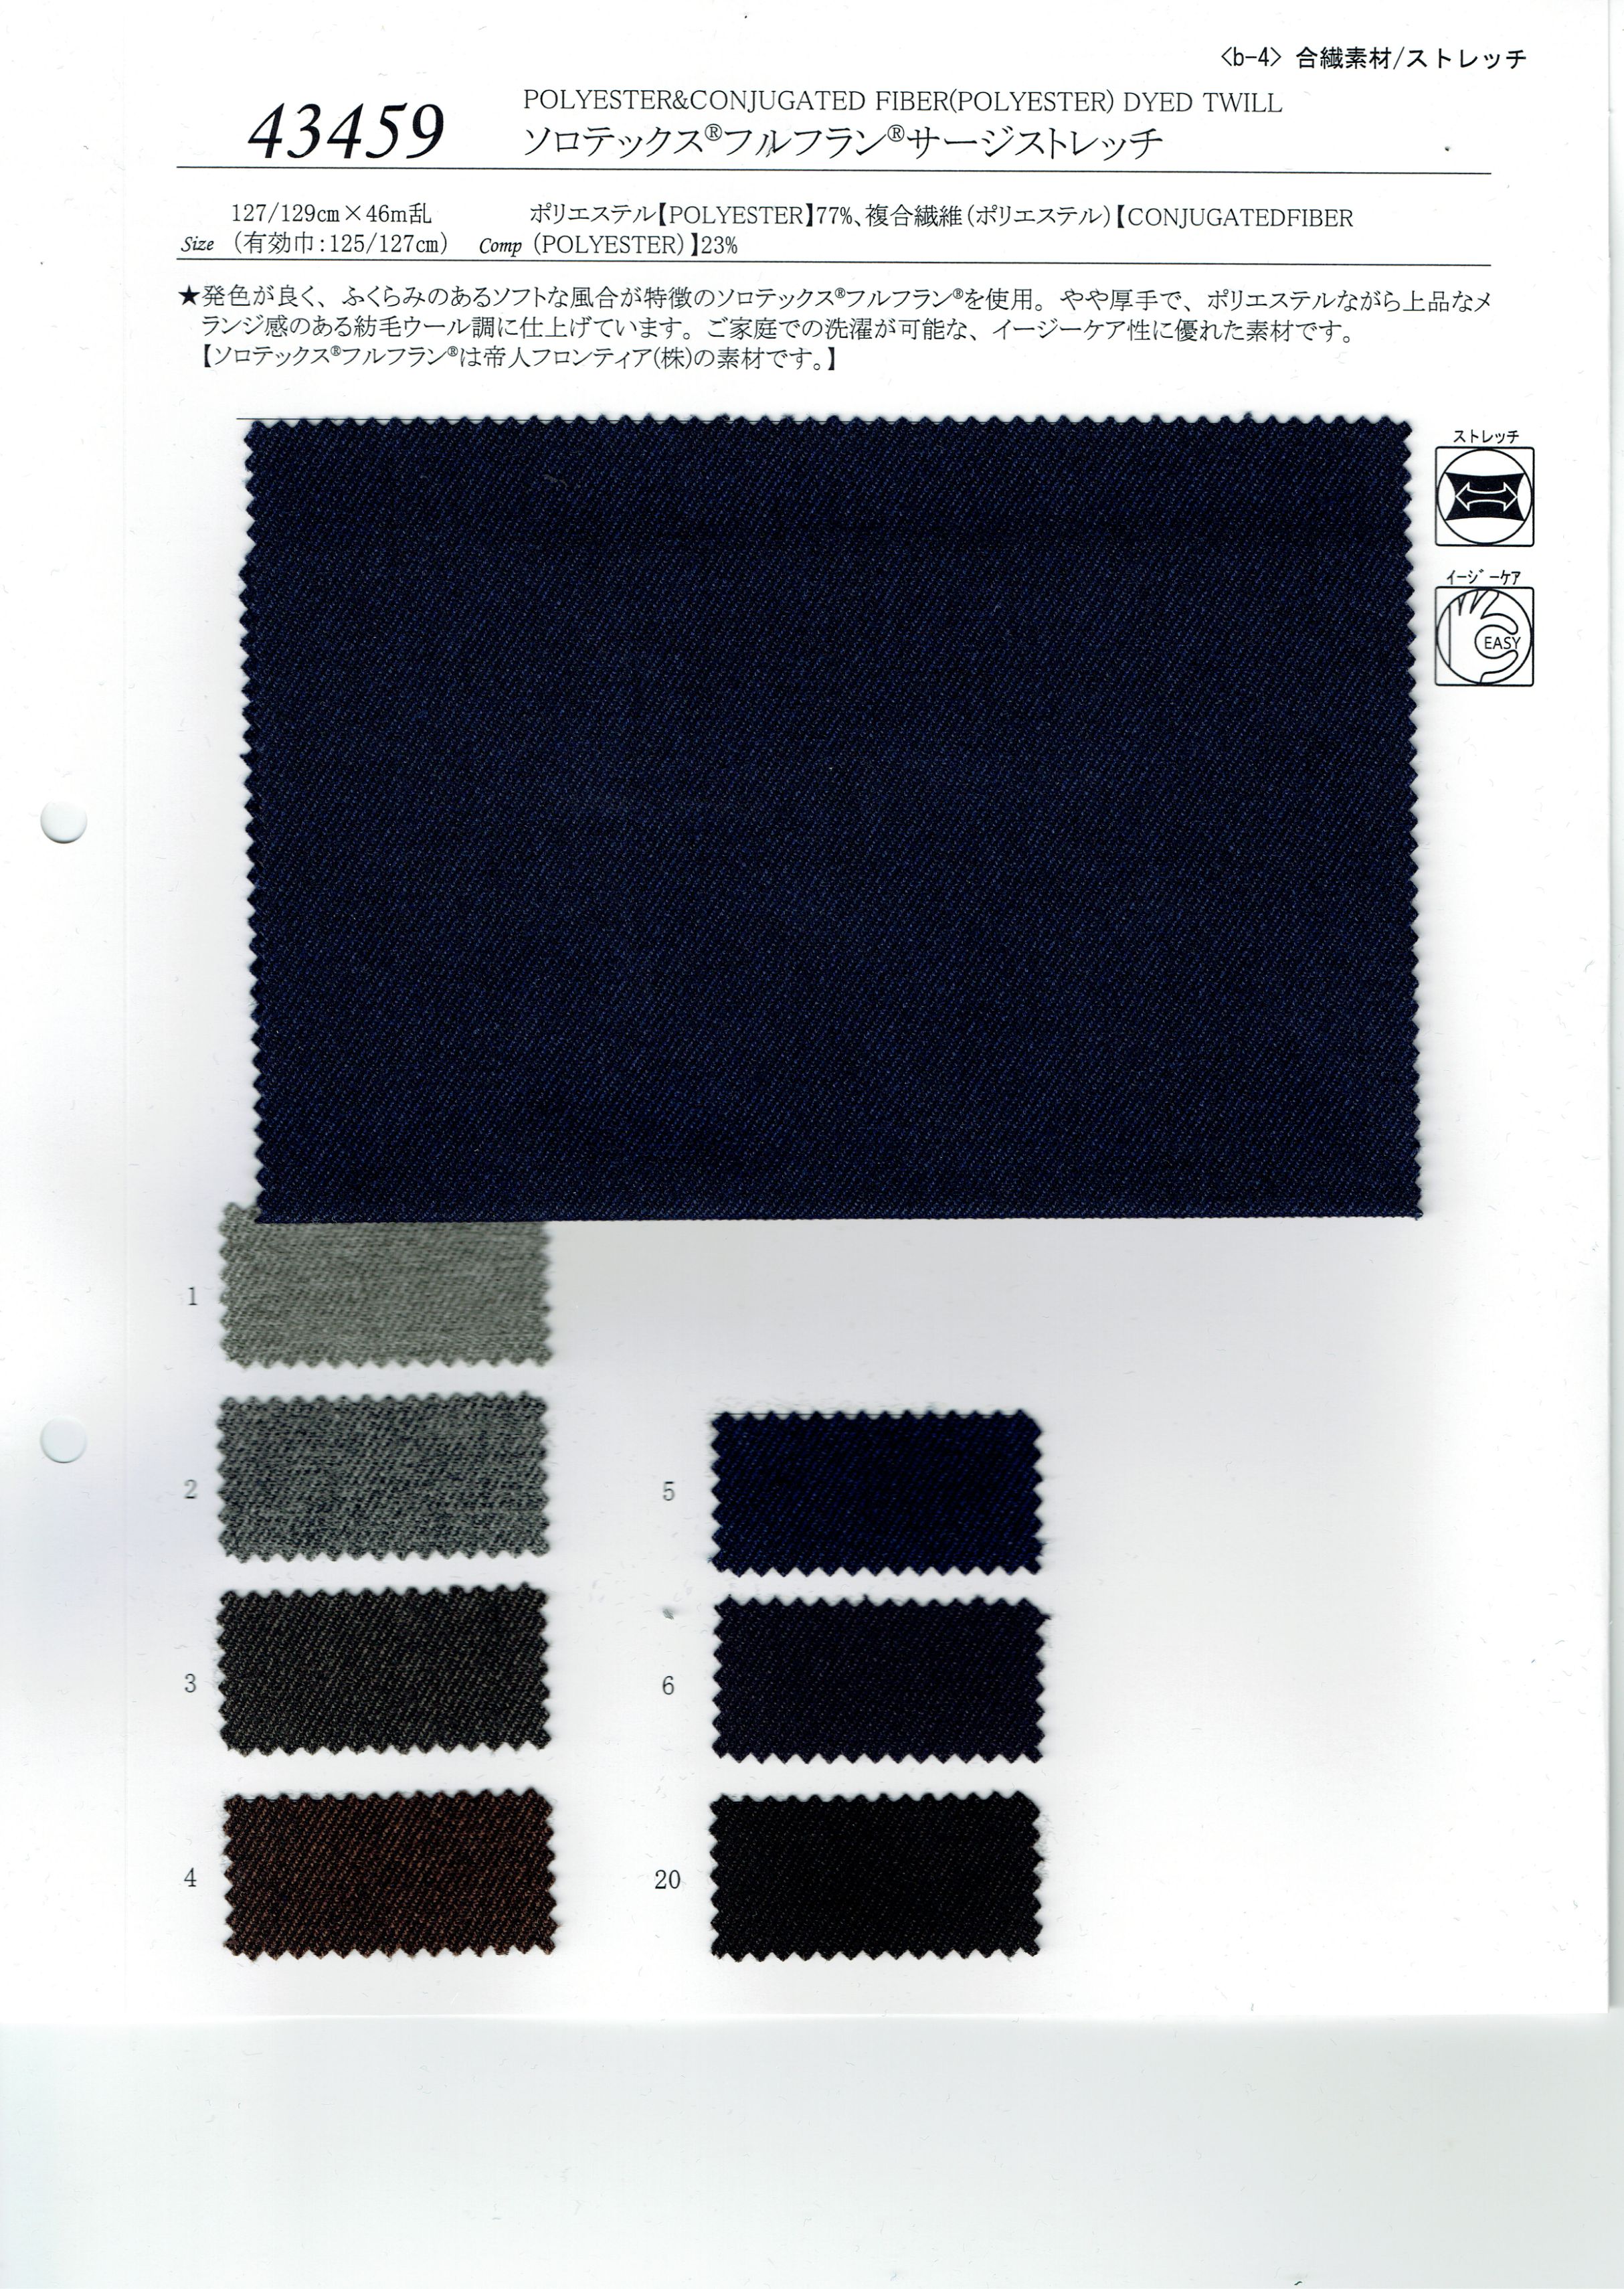 View POLYESTER77/CONJUGATED FIBER[POLYESTER]23CONJUGATEDD FIBER[] DYED TWILLCONJUGATEDD FIBER[] DYED TWILL